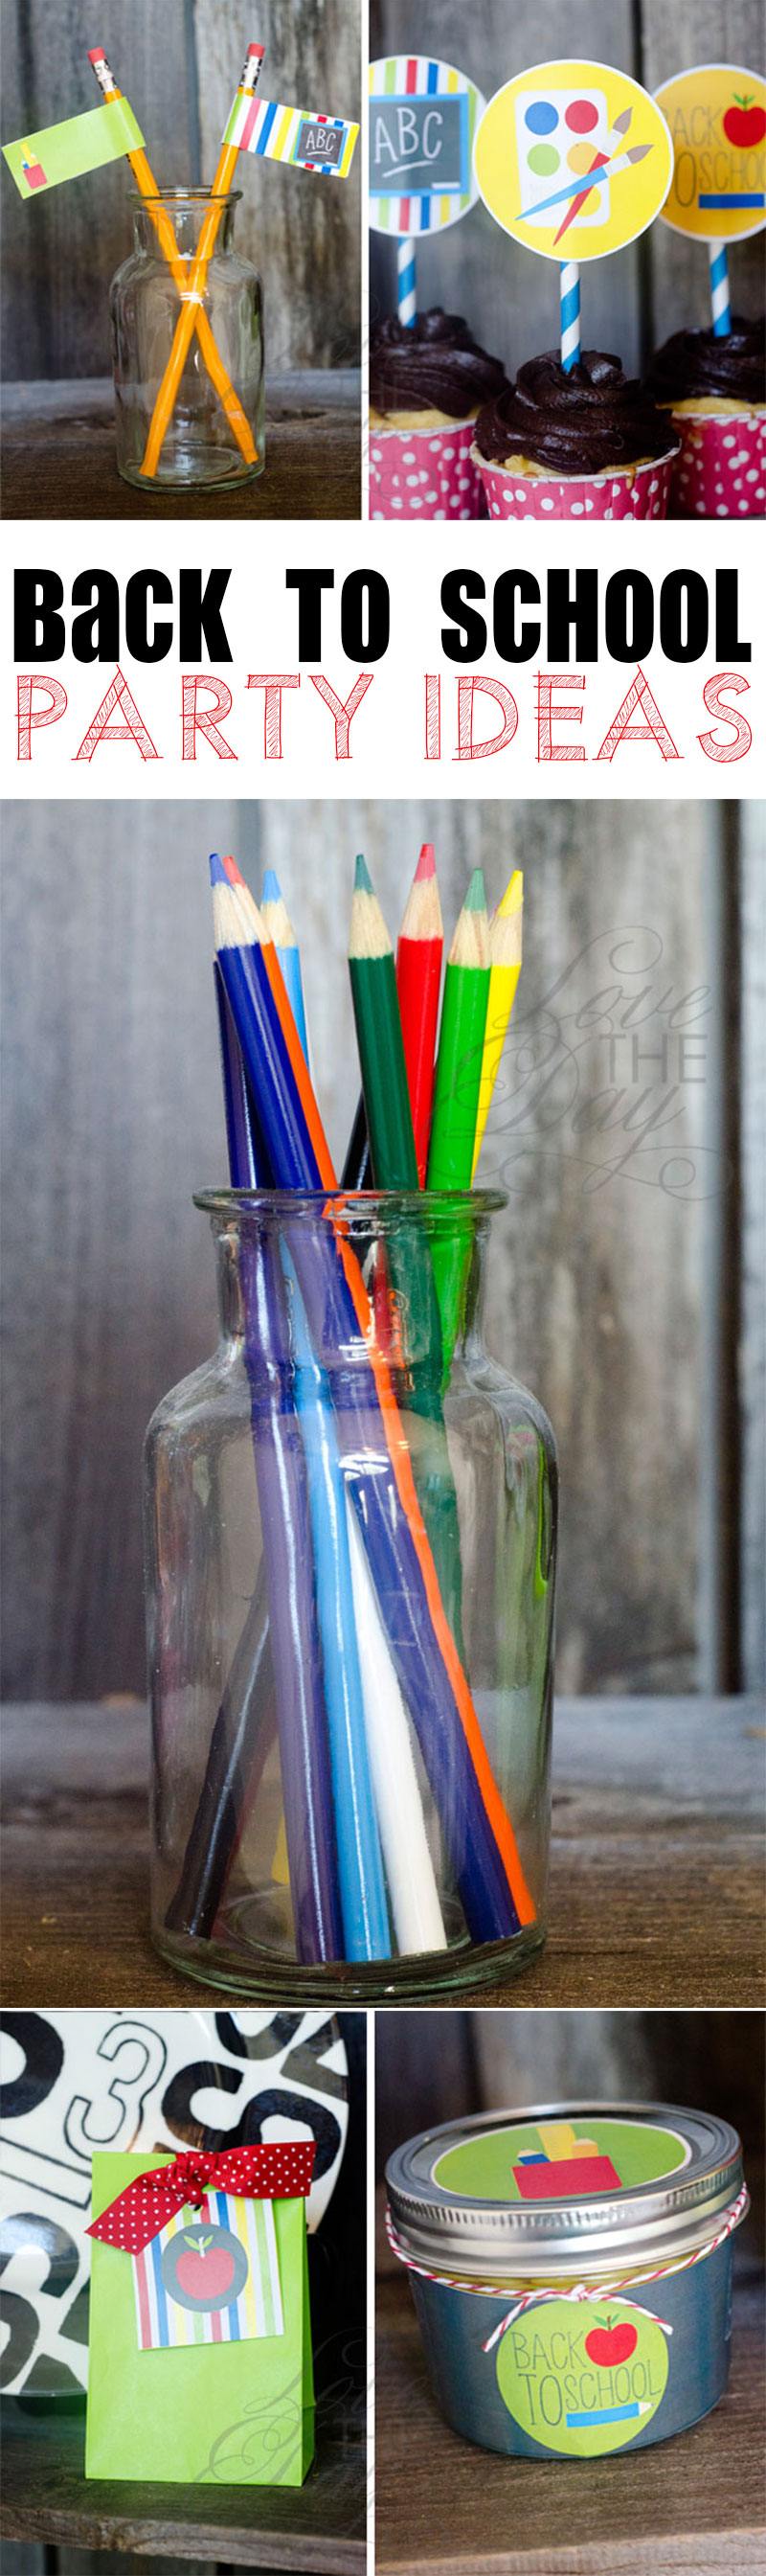 Back To School Party Ideas by Lindi Haws of Love The Day